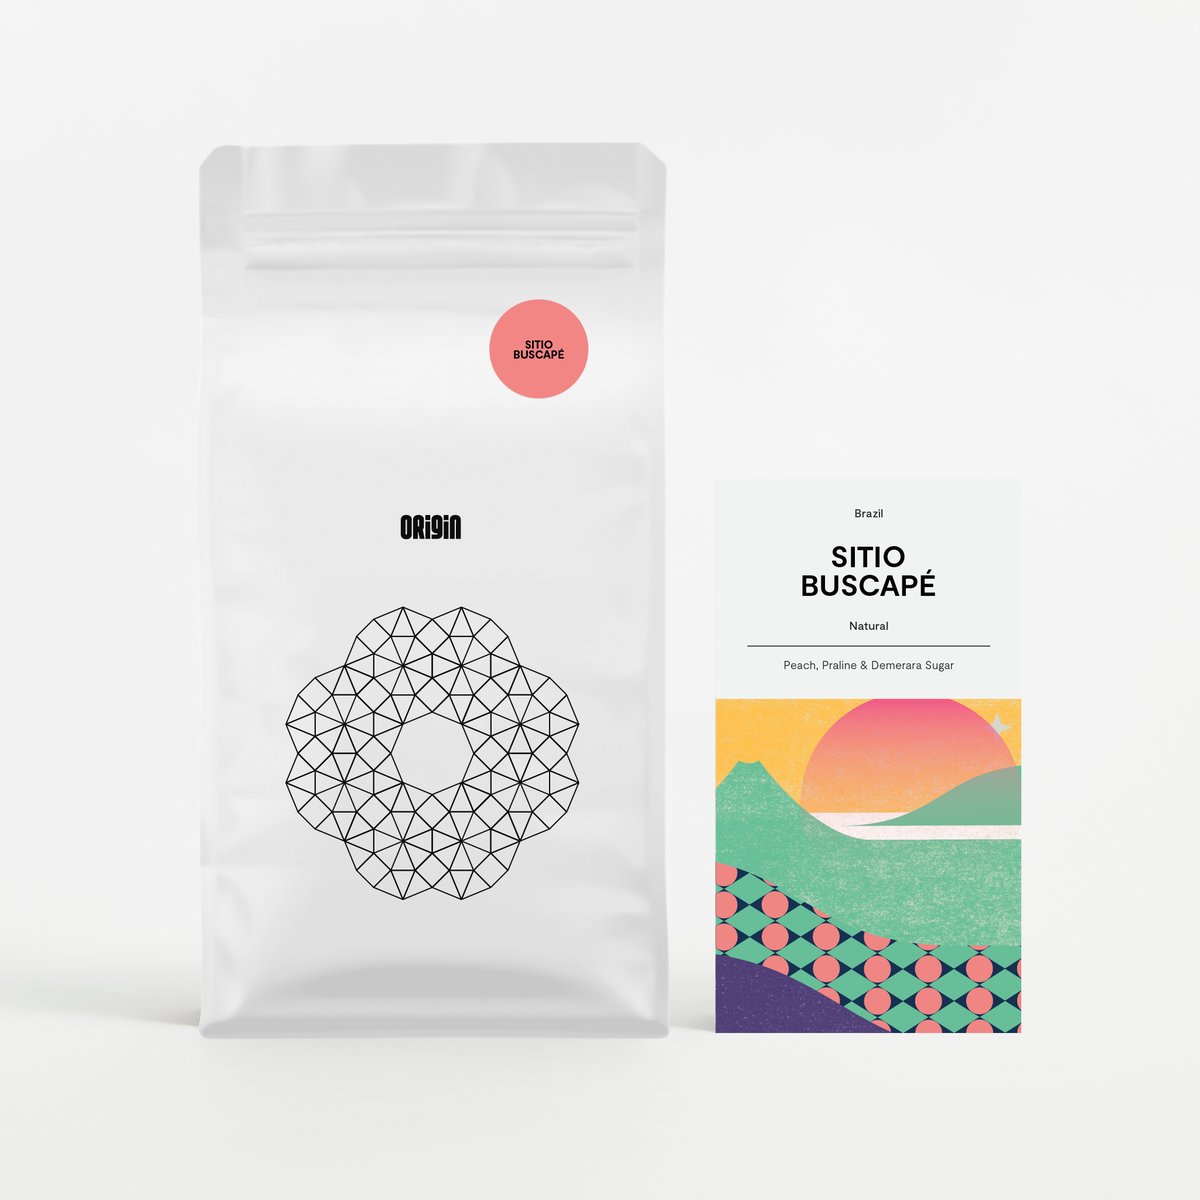 Meet our latest release, Sitio Buscape, a phenomenal natural process coffee from Brazil.  A perfect mix of sweetness and acidity in the shape of stone fruit and a long, caramel finish. > bit.ly/3mGkVfU